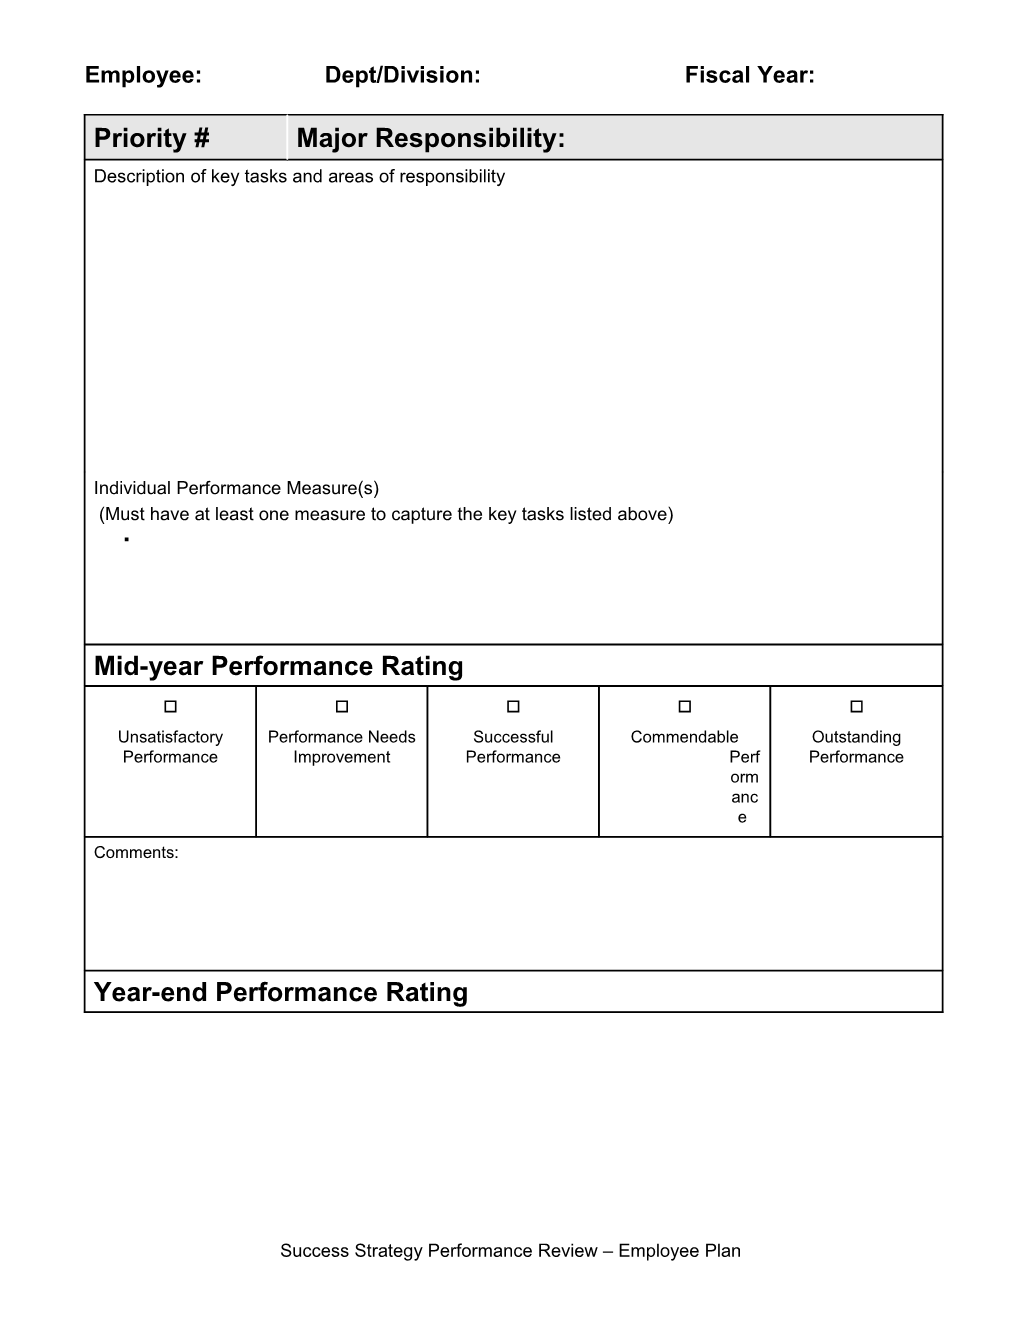 Success Strategy Performance Review